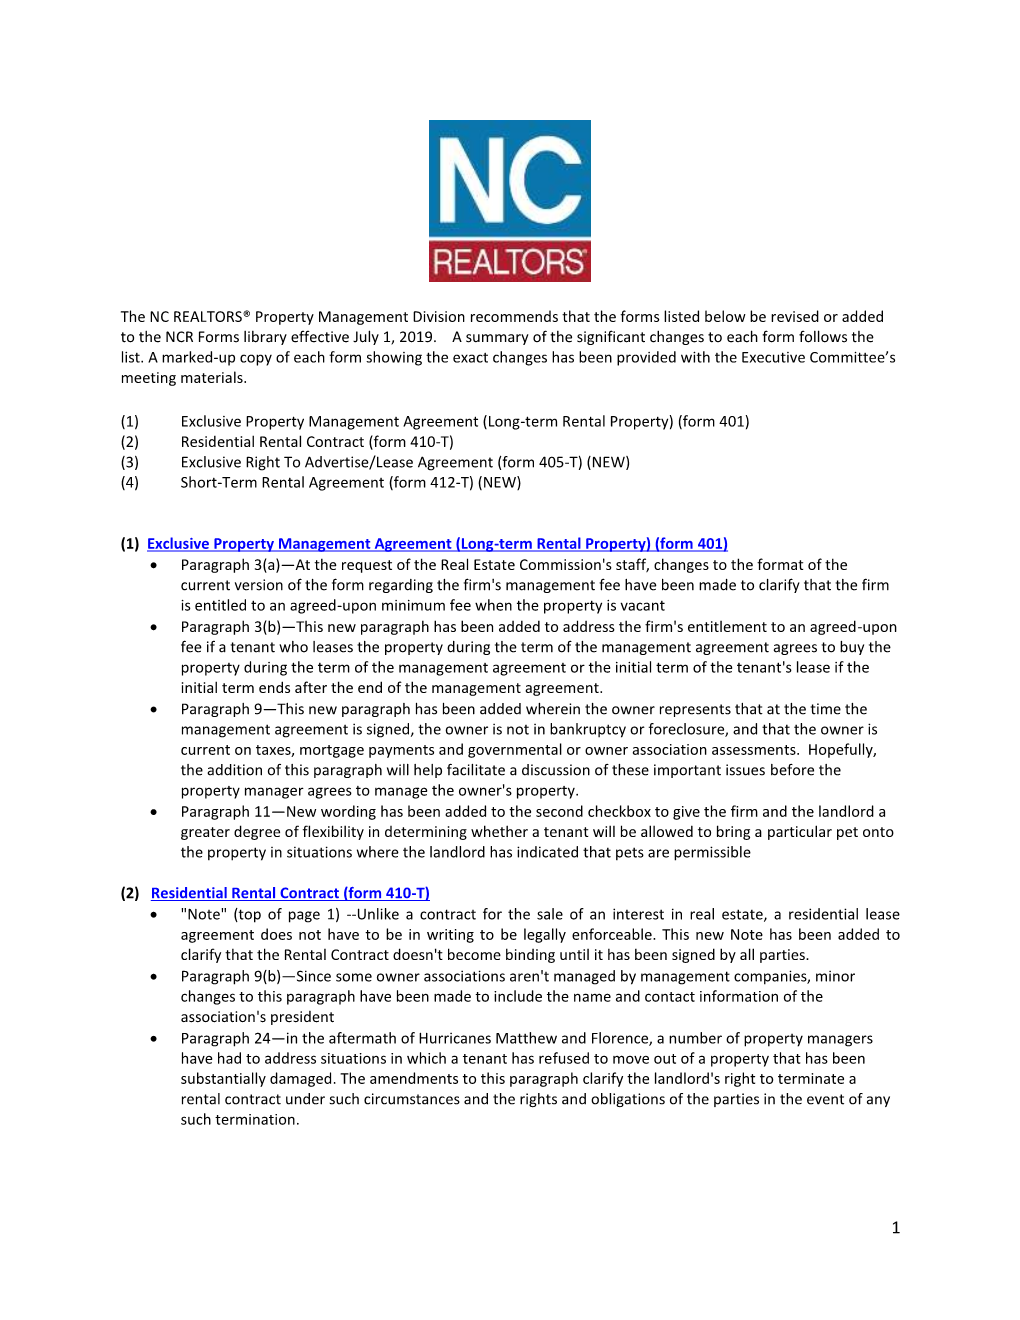 The NC REALTORS® Property Management Division Recommends That the Forms Listed Below Be Revised Or Added to the NCR Forms Library Effective July 1, 2019